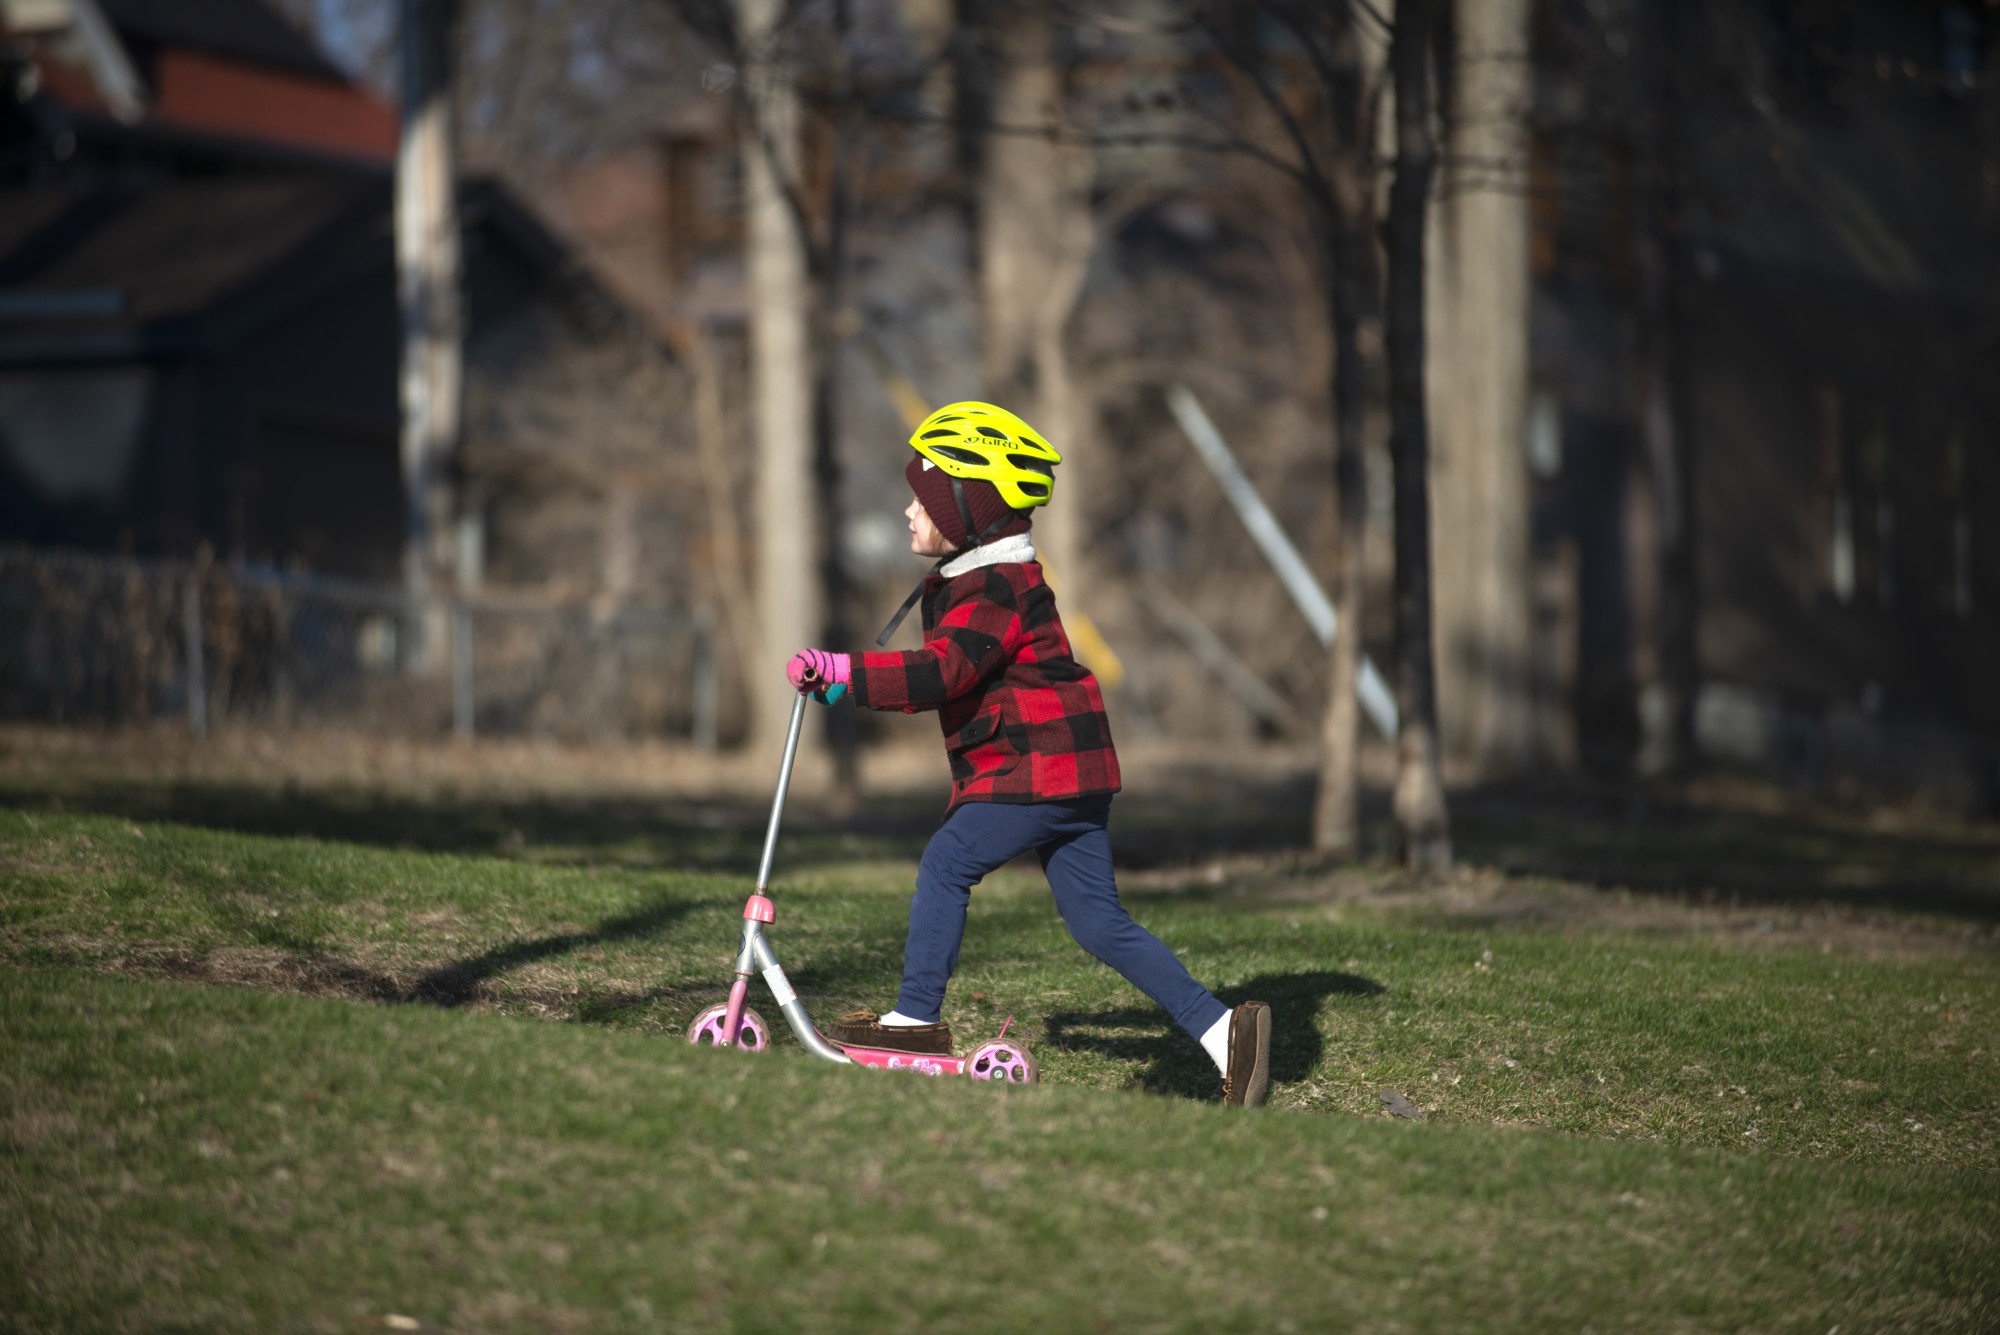 Sullivan Moran (4) rides his scooter uphill at Powderhorn park in Minneapolis on Tuesday, March 31. 
